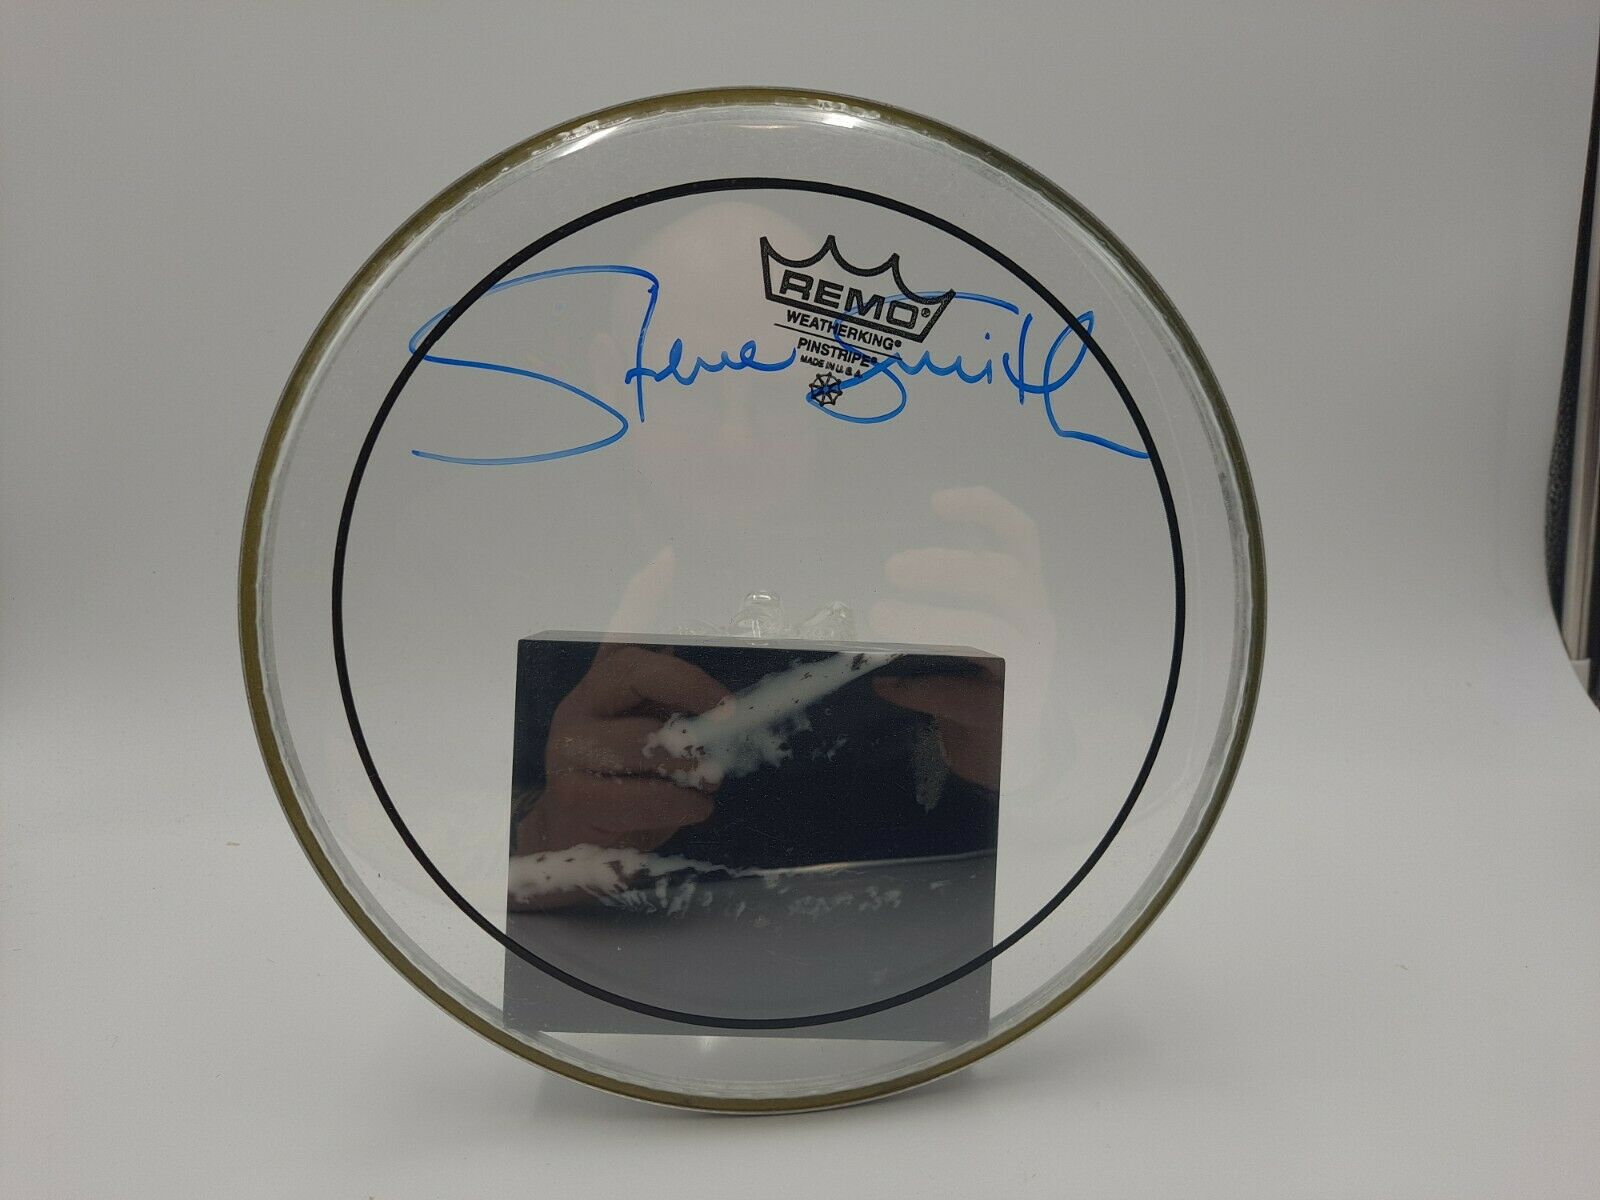 Steve Smith Drummer Of Journey Signed 10" Remo Drum Head